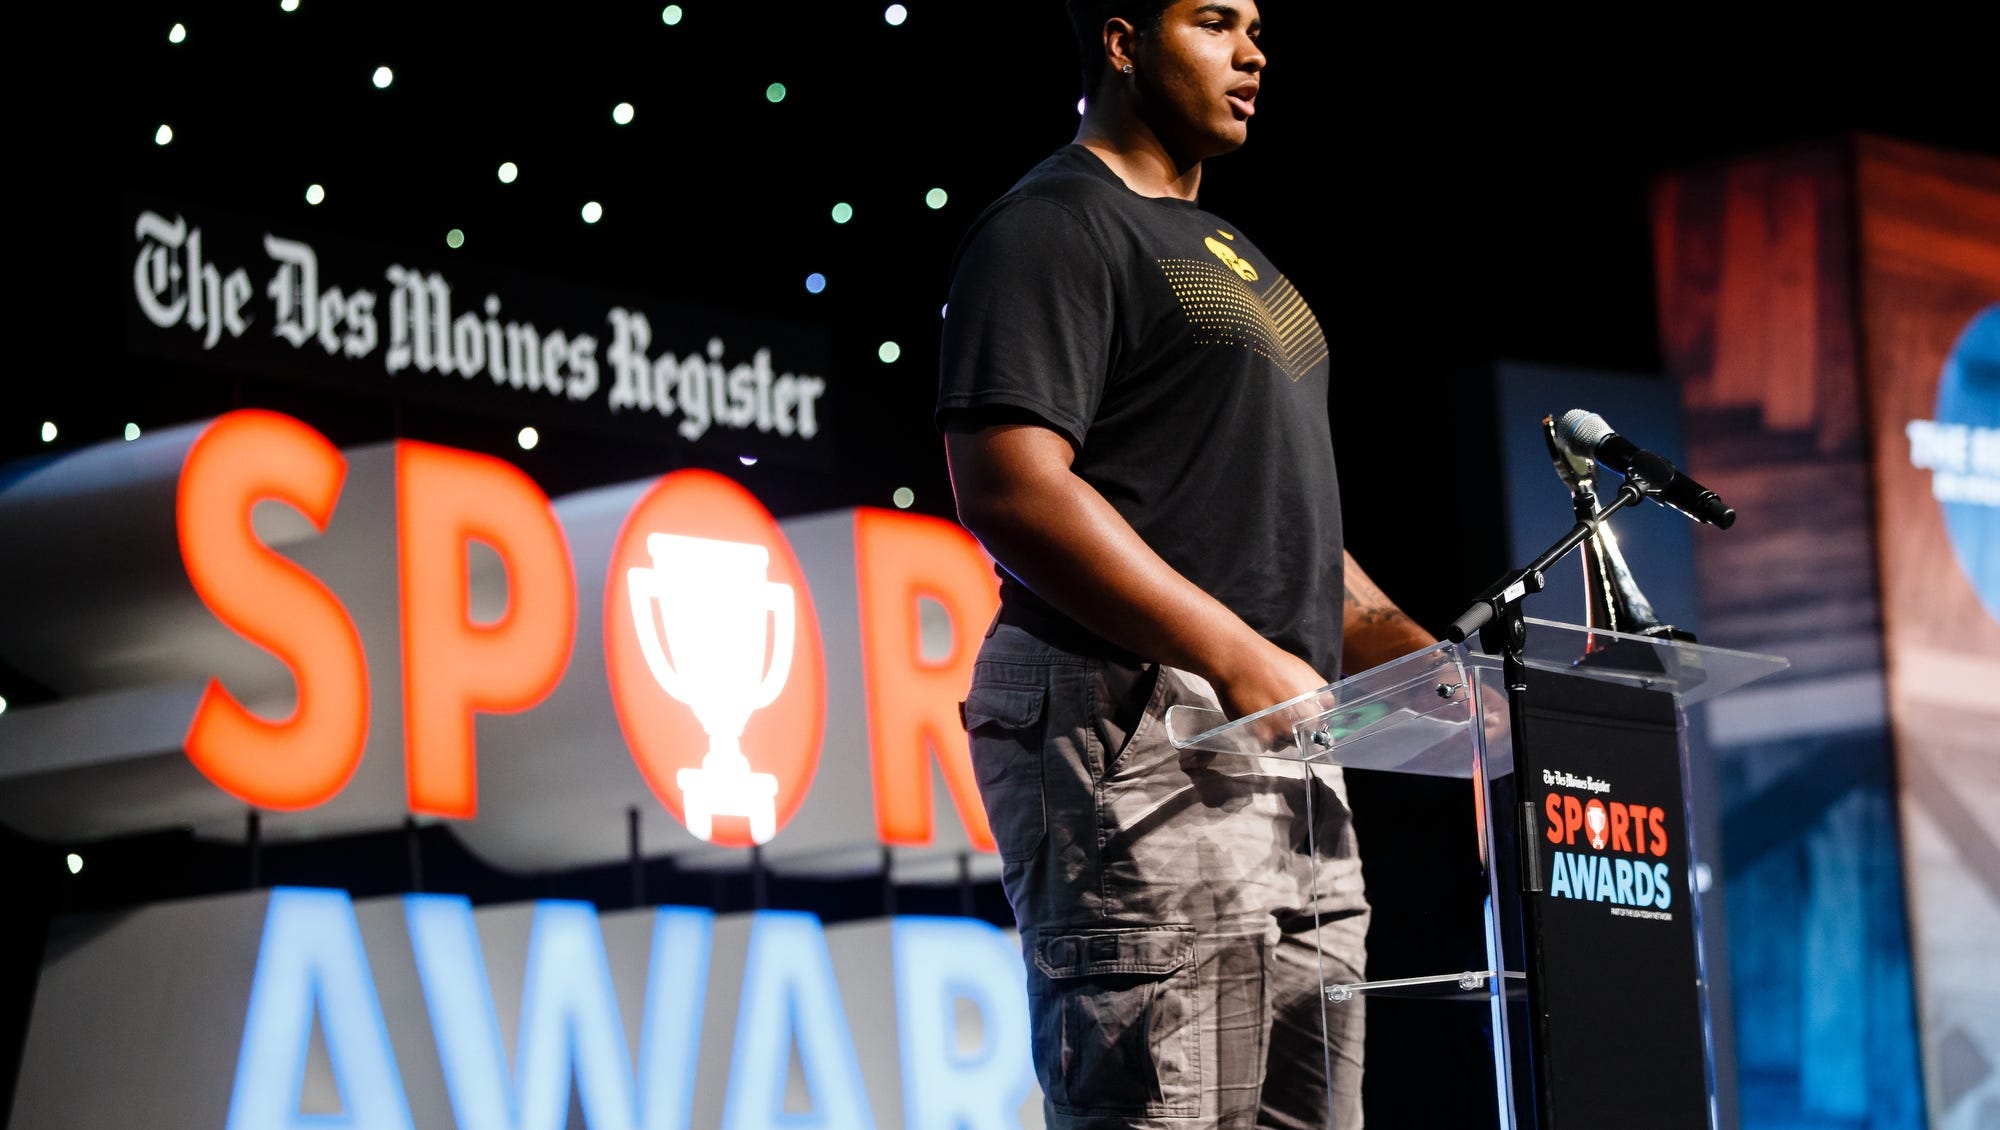 Mount Vernon's Tristan Wirfs accepts the boys athlete of the year during the 2017 Des Moines Register Sports Awards on Saturday, June 24, 2017 in Des Moines.